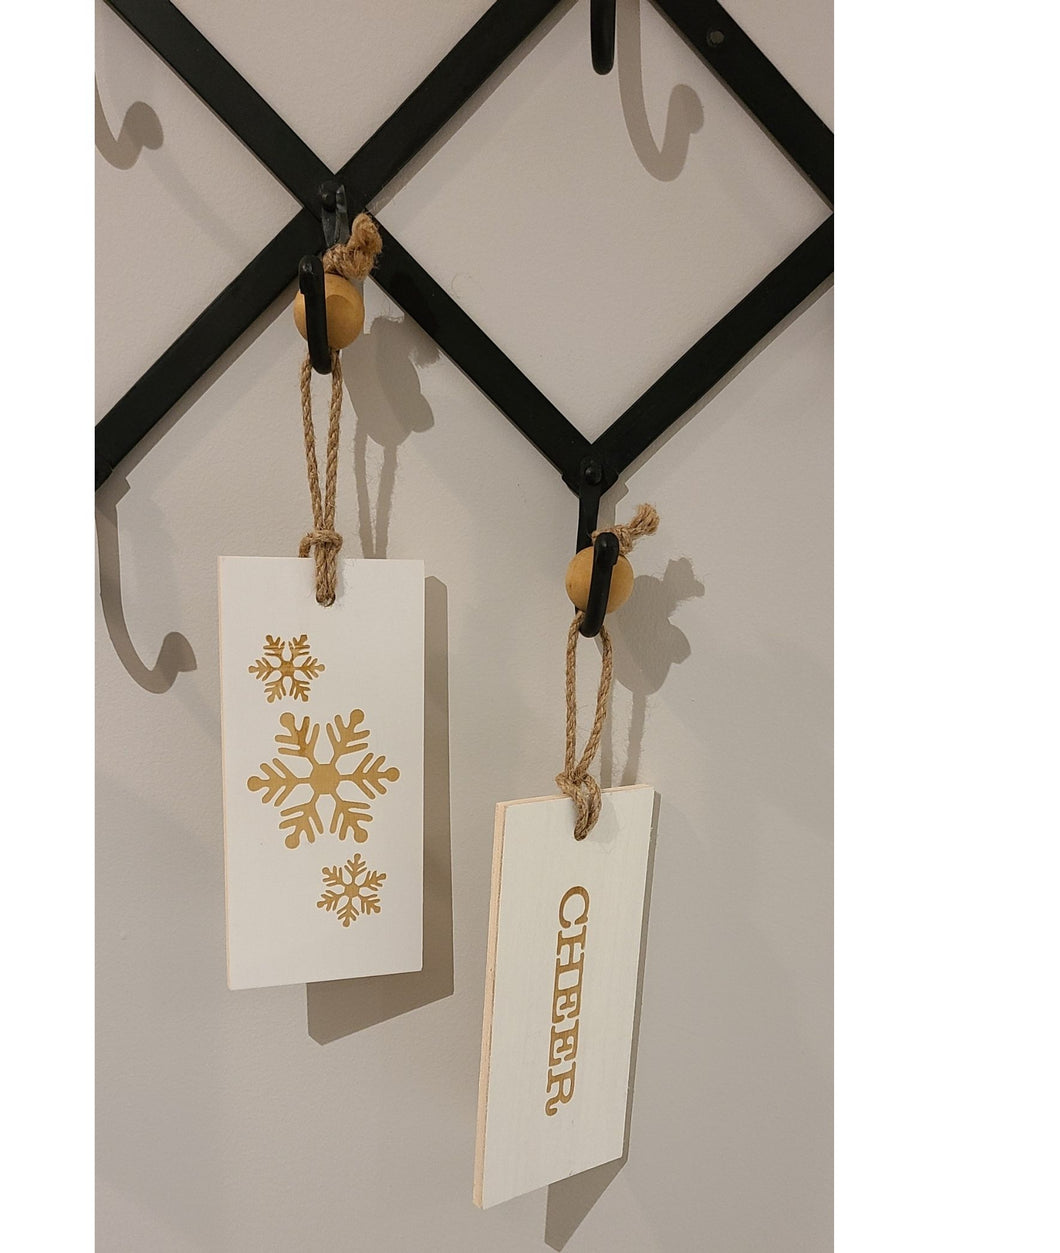 These fun and whymsical Christmas Hangers will create the perfect welcome this holiday season. With a Christmas Message on one side, and a Winter Symbol on the other, this white and gold decor will look beautiful in any room. Put it anywhere...doorknobs, walls, mantles...and you can even use it as ornaments on your tree. 2 Styles to choose from: Cheer Noel. Size: 7.5 x 3.5 x .25